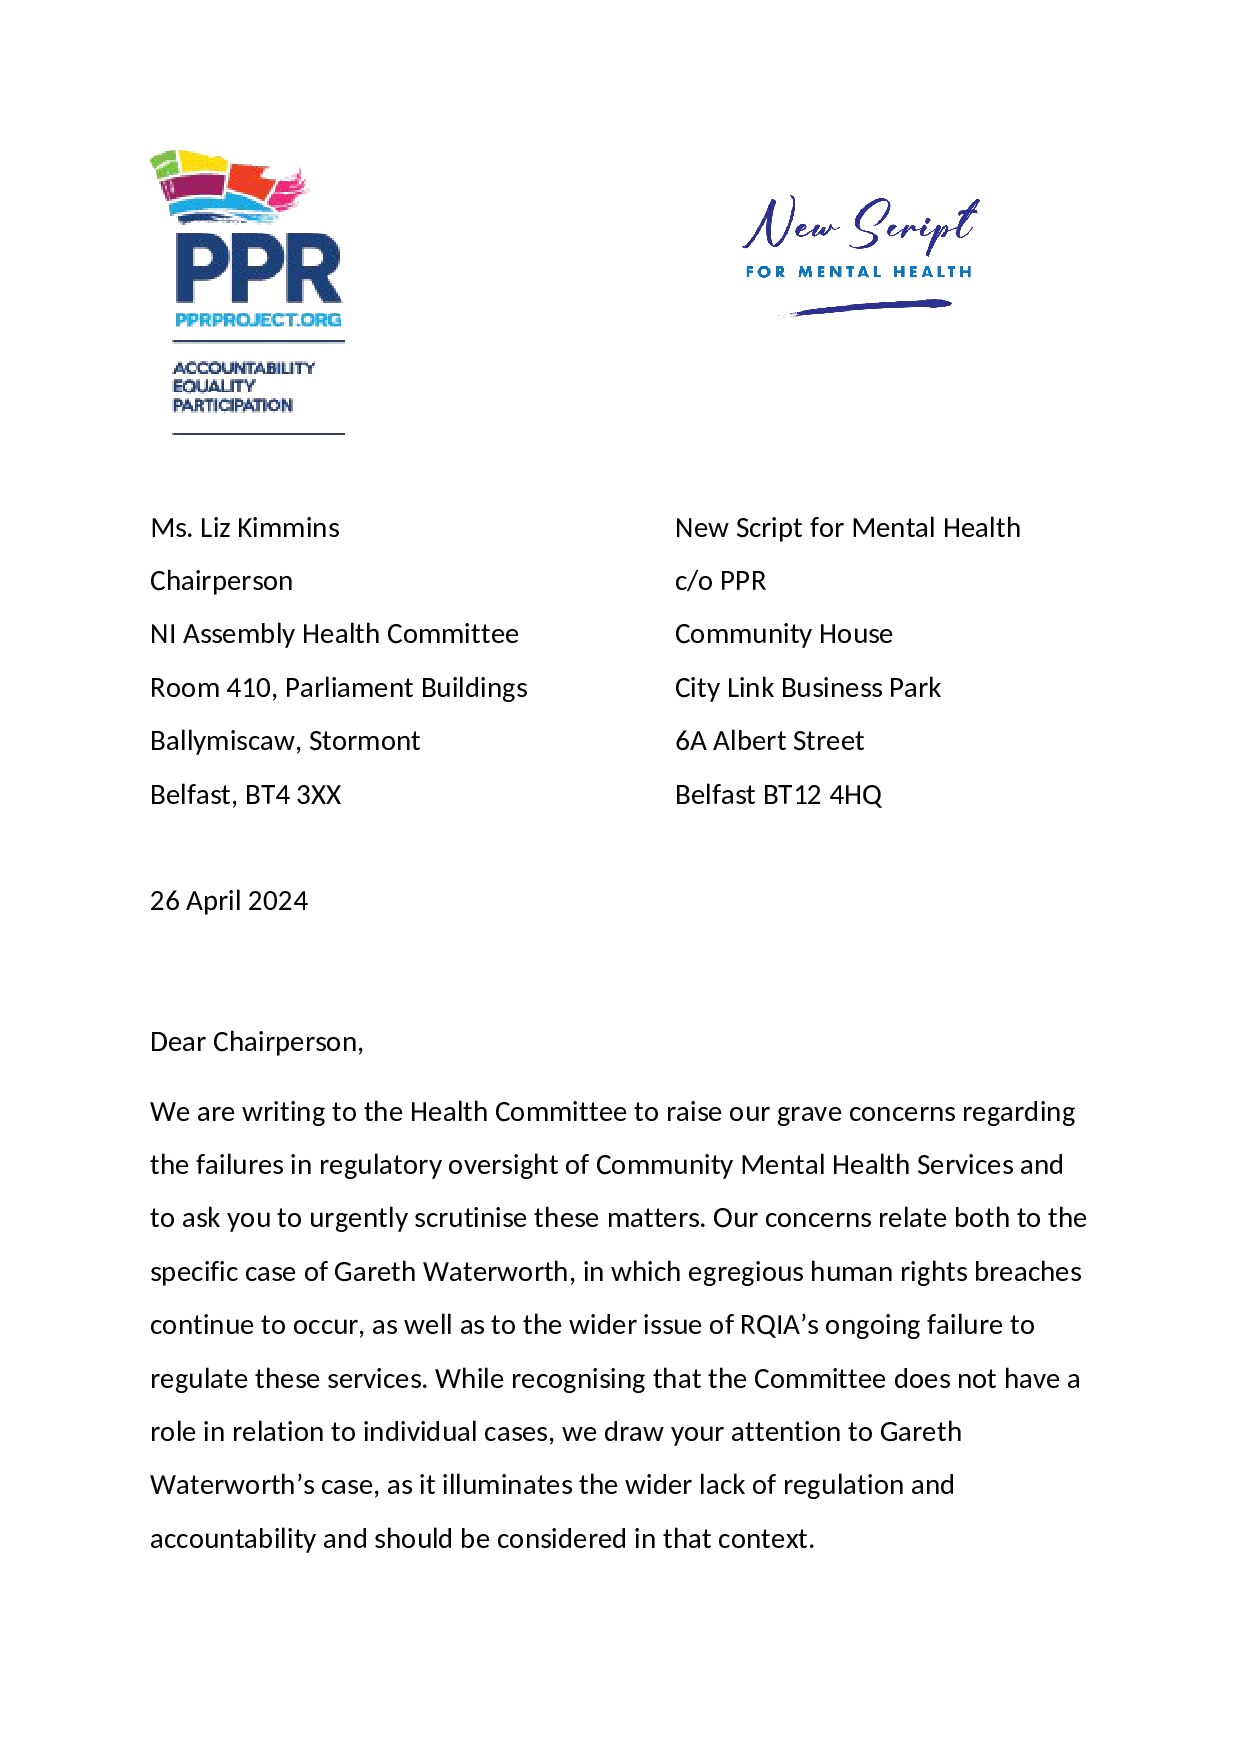 Letter to NI Assembly Health Committee regarding regulation of community mental health services